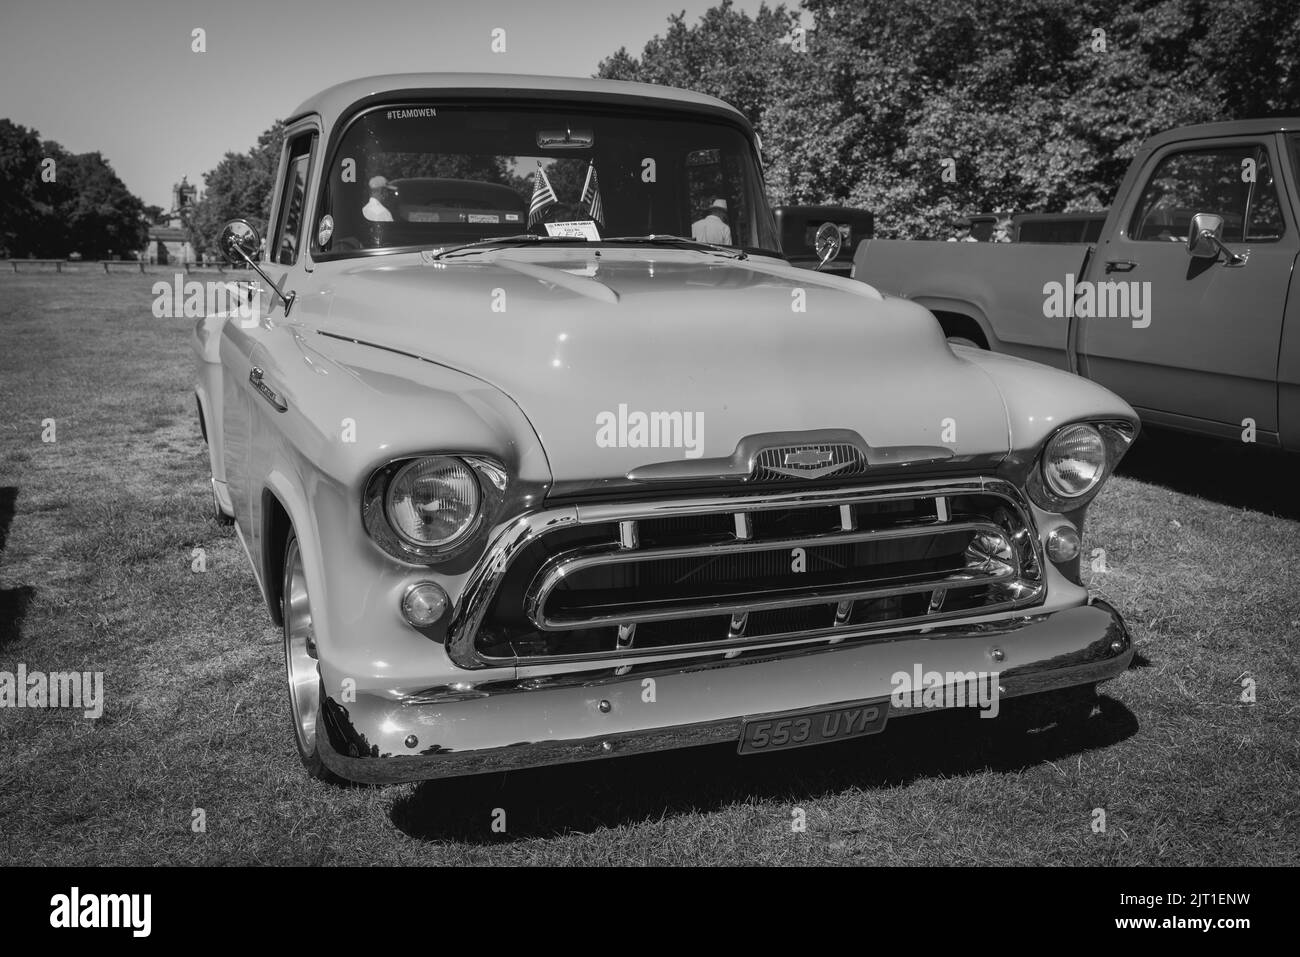 1957 la Task Force Chevrolet ‘553 UYP’ in mostra all’American Auto Club Rally of the Giants, tenutosi a Blenheim Palace il 10th luglio 2022 Foto Stock